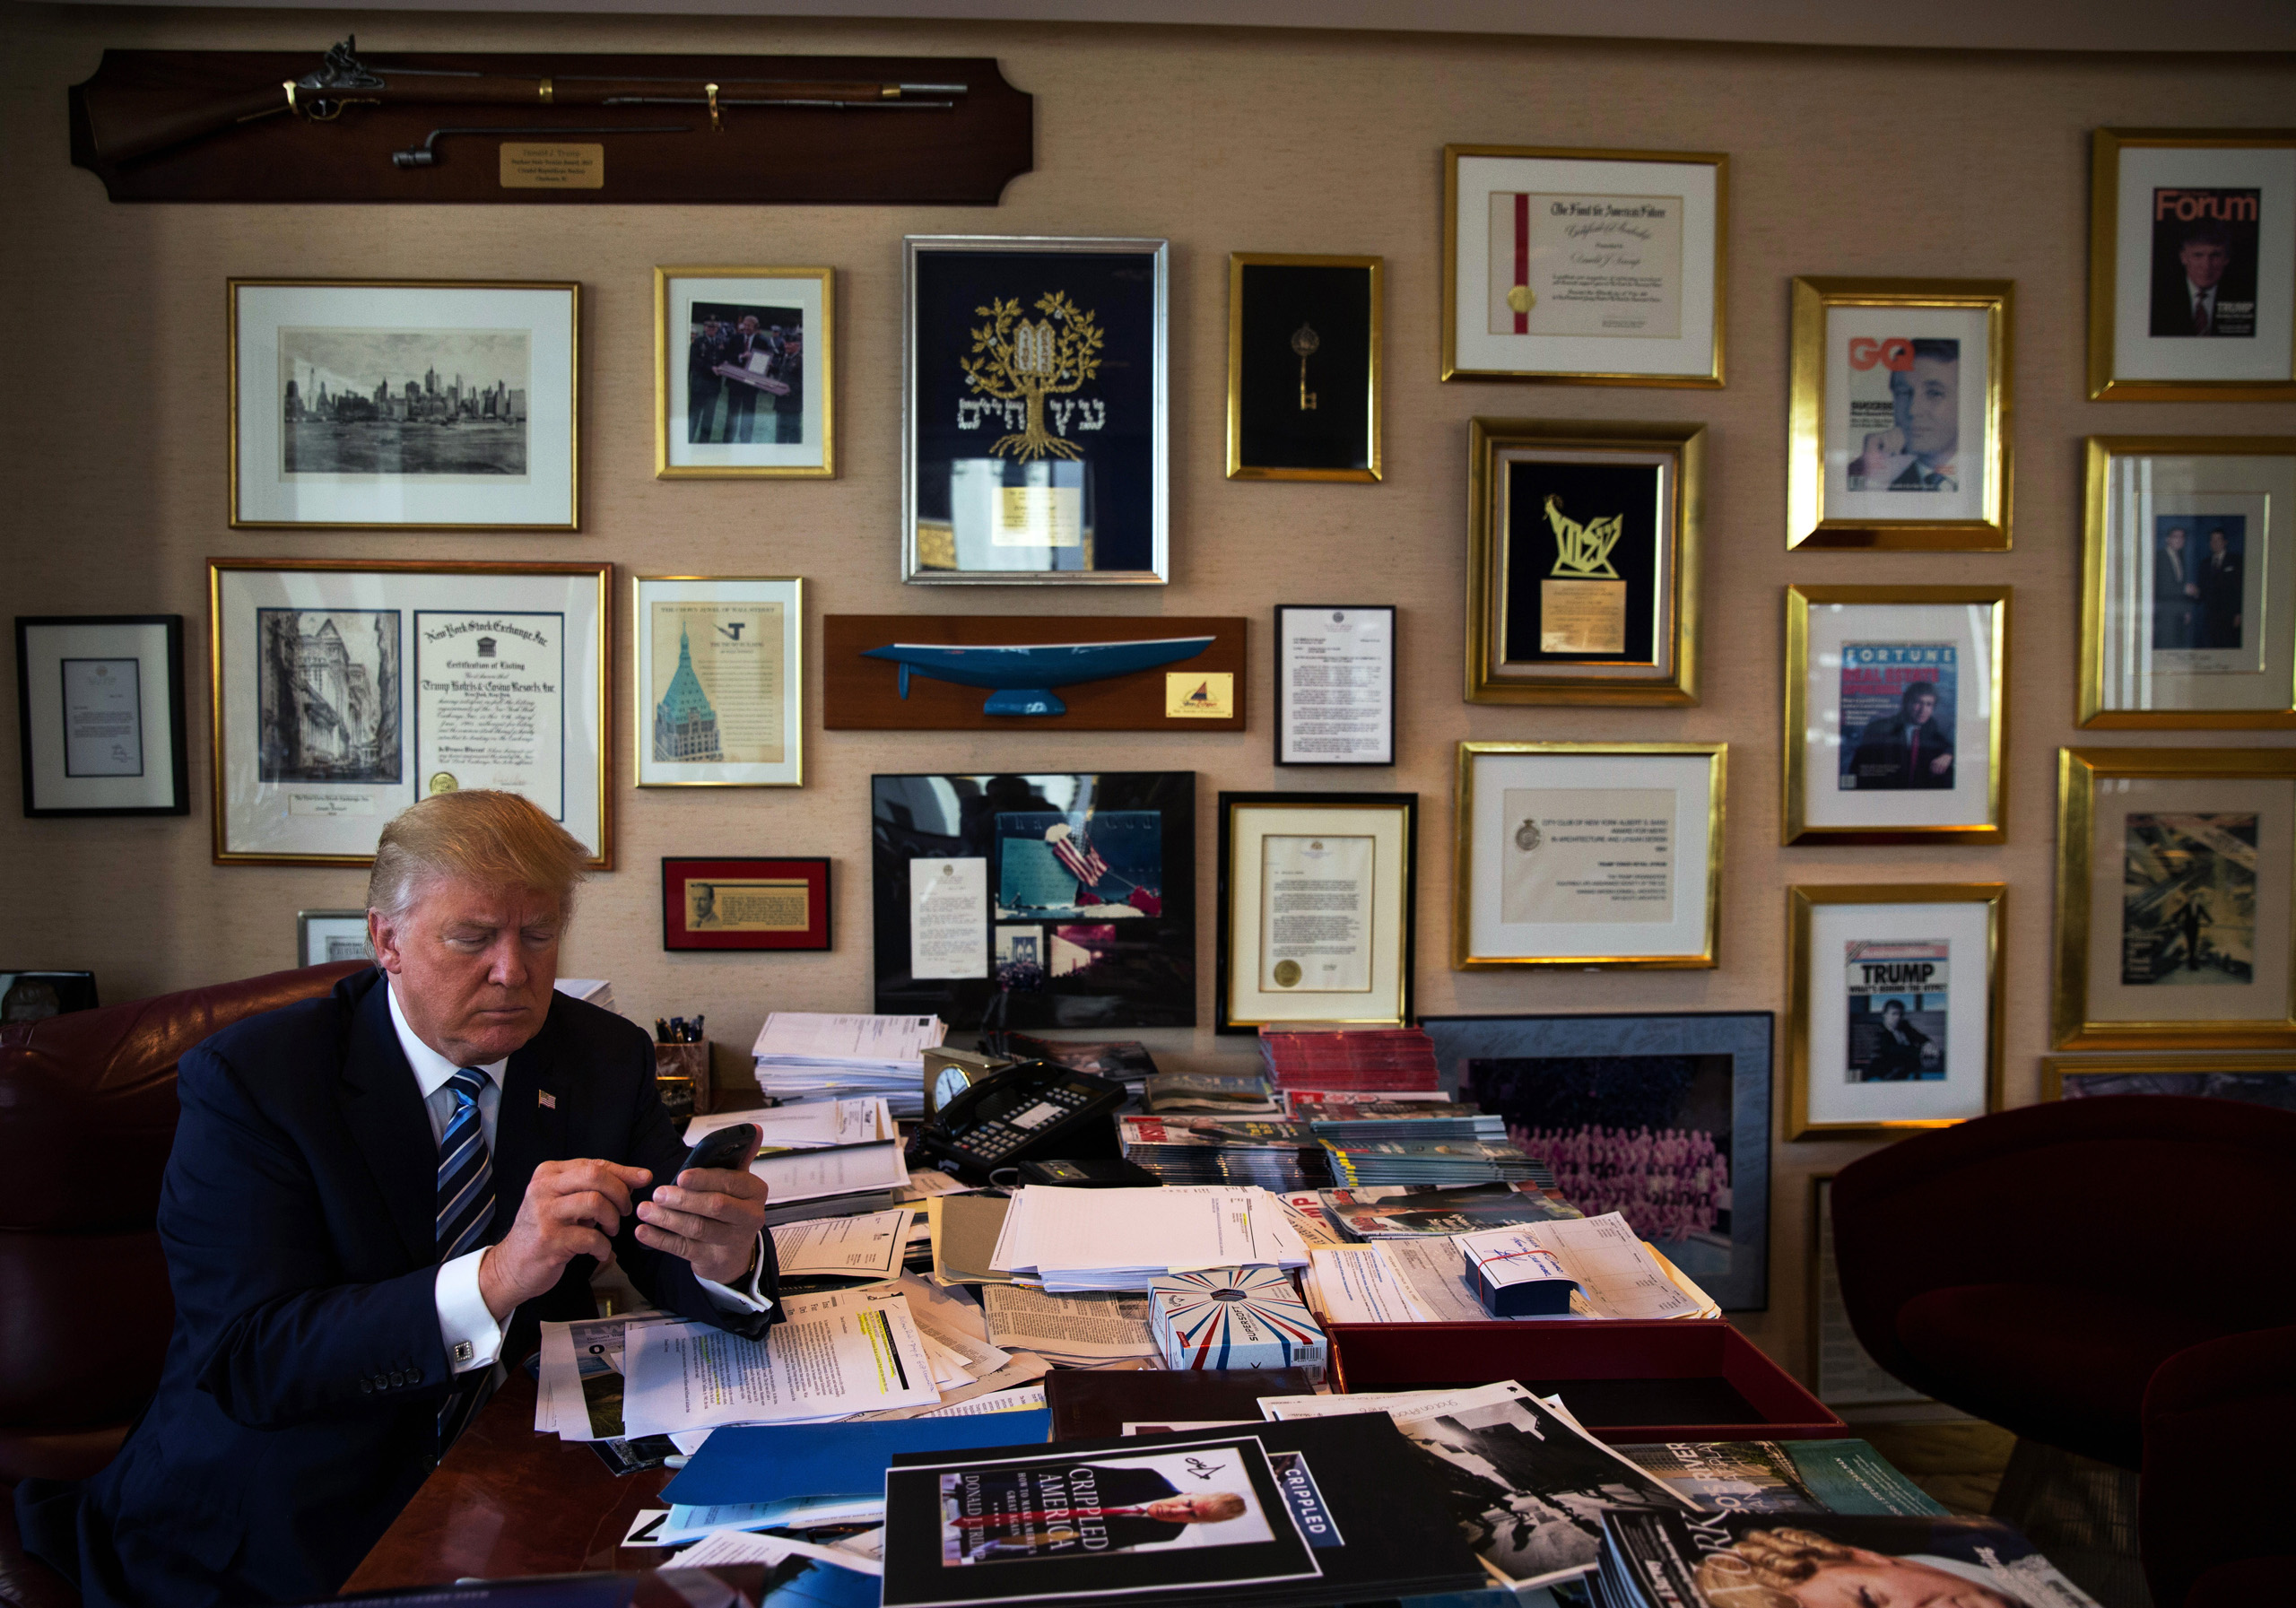 Donald Trump demonstrates how he Tweets using his Samsung phone in his office in the Trump Tower in New York City on Sept. 29, 2015. (Josh Haner—The New York Times/Redux)